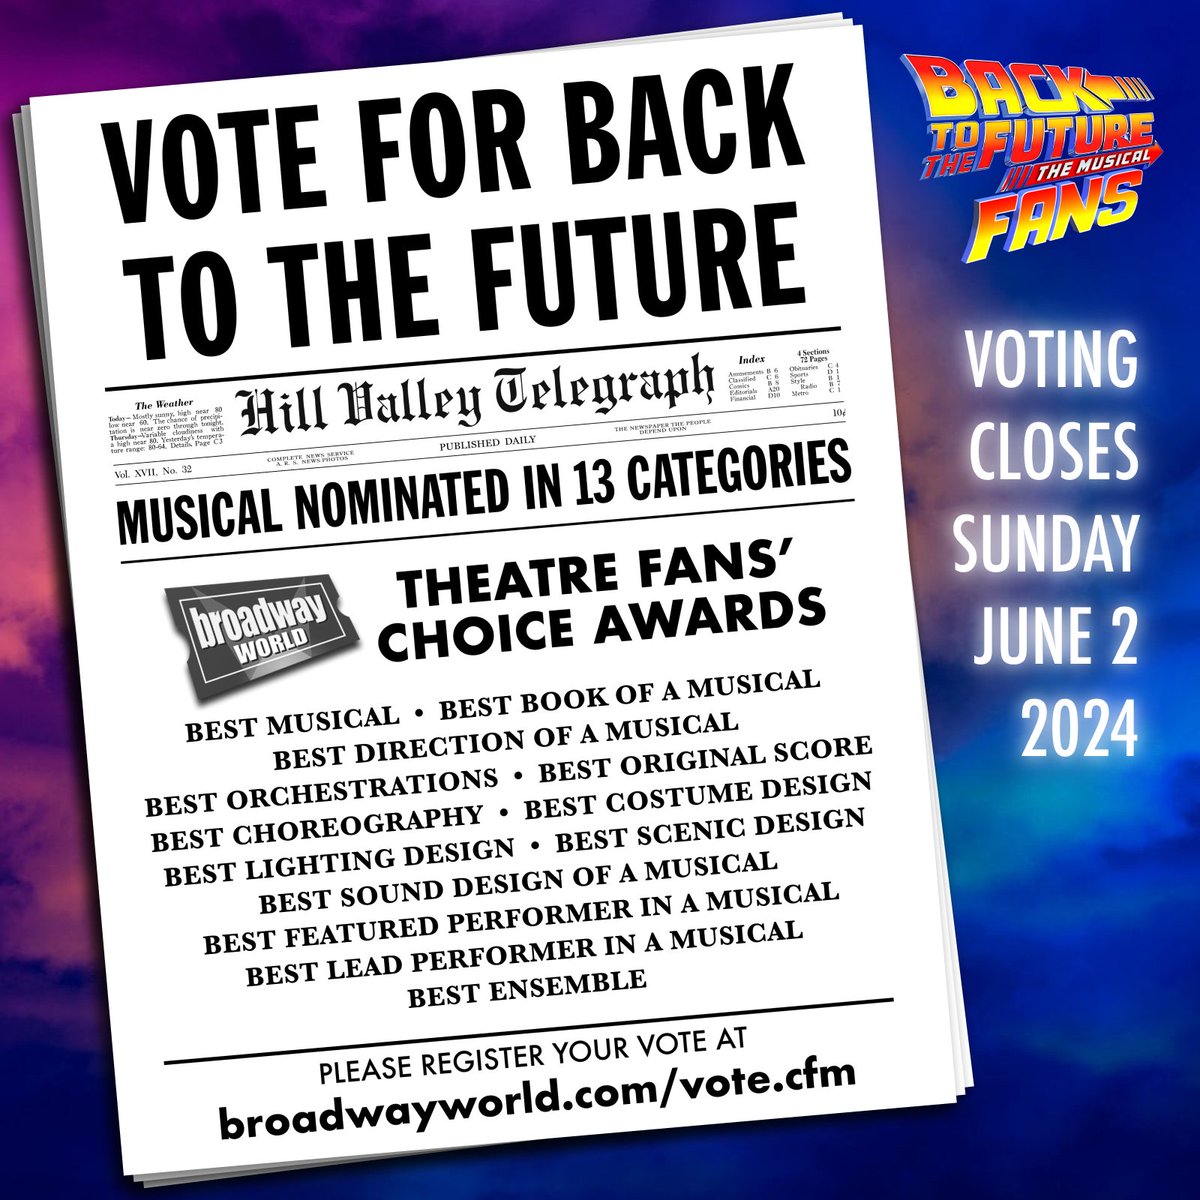 SAVE THE CLOCK TOWER… erm… VOTE FOR BACK TO THE FUTURE 🗳 Voting in the 2024 @BroadwayWorld Theatre Fans’ Choice Awards will only take a MINUTE but you could change musical theater history FOREVER! Please vote for @BTTFBway in THIRTEEN categories: 🗳 broadwayworld.com/vote.cfm